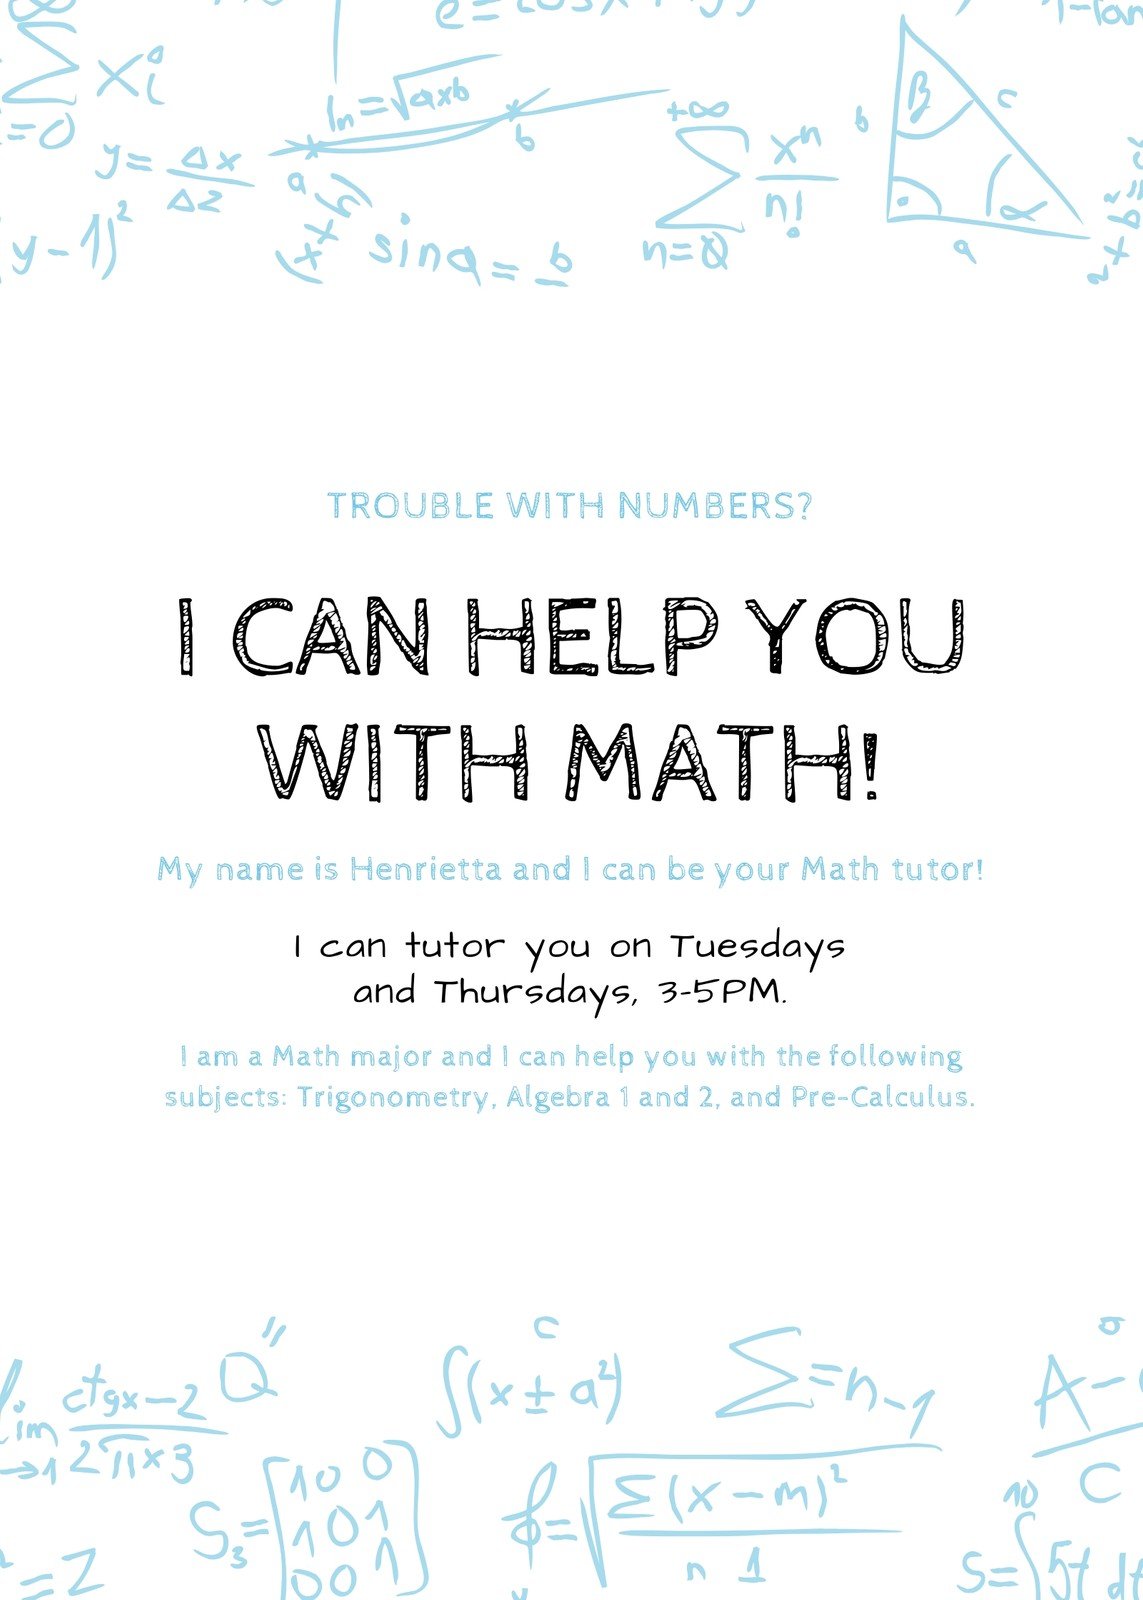 Customize 22+ Tutor Flyers Templates Online - Canva In Math Tutoring Flyer Template